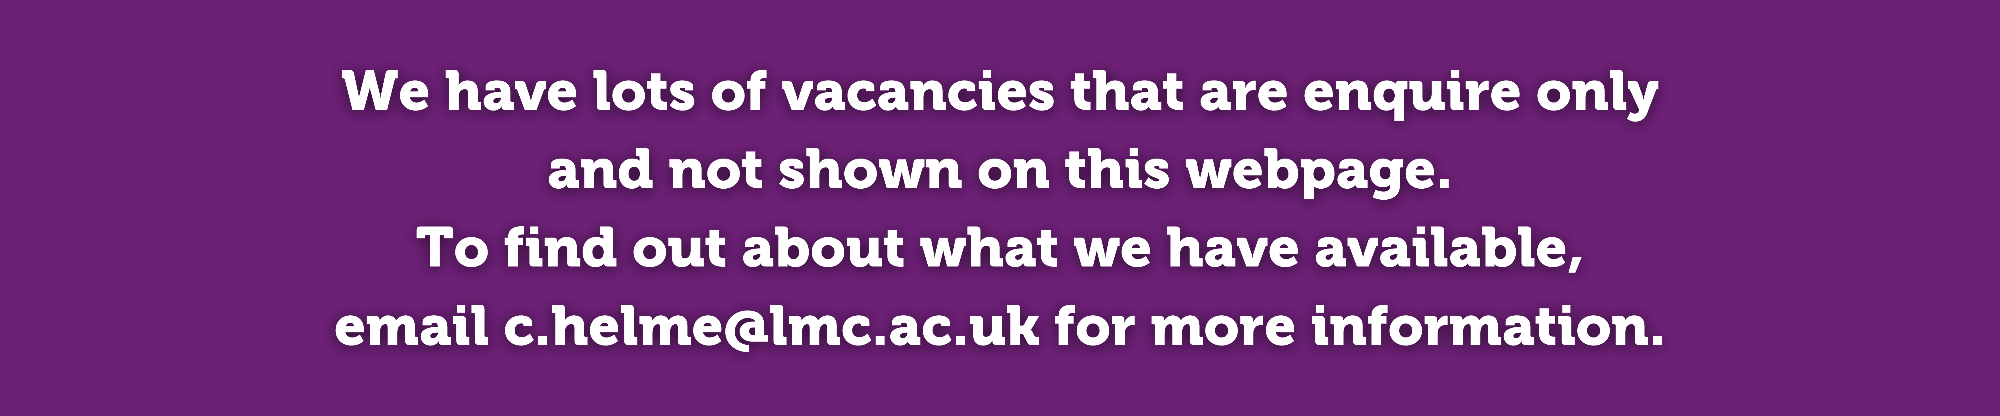 We have lots of vacancies that are enquire only  and not shown on this webpage.  To find out about what we have available,  email c.helme@lmc.ac.uk for more information. 